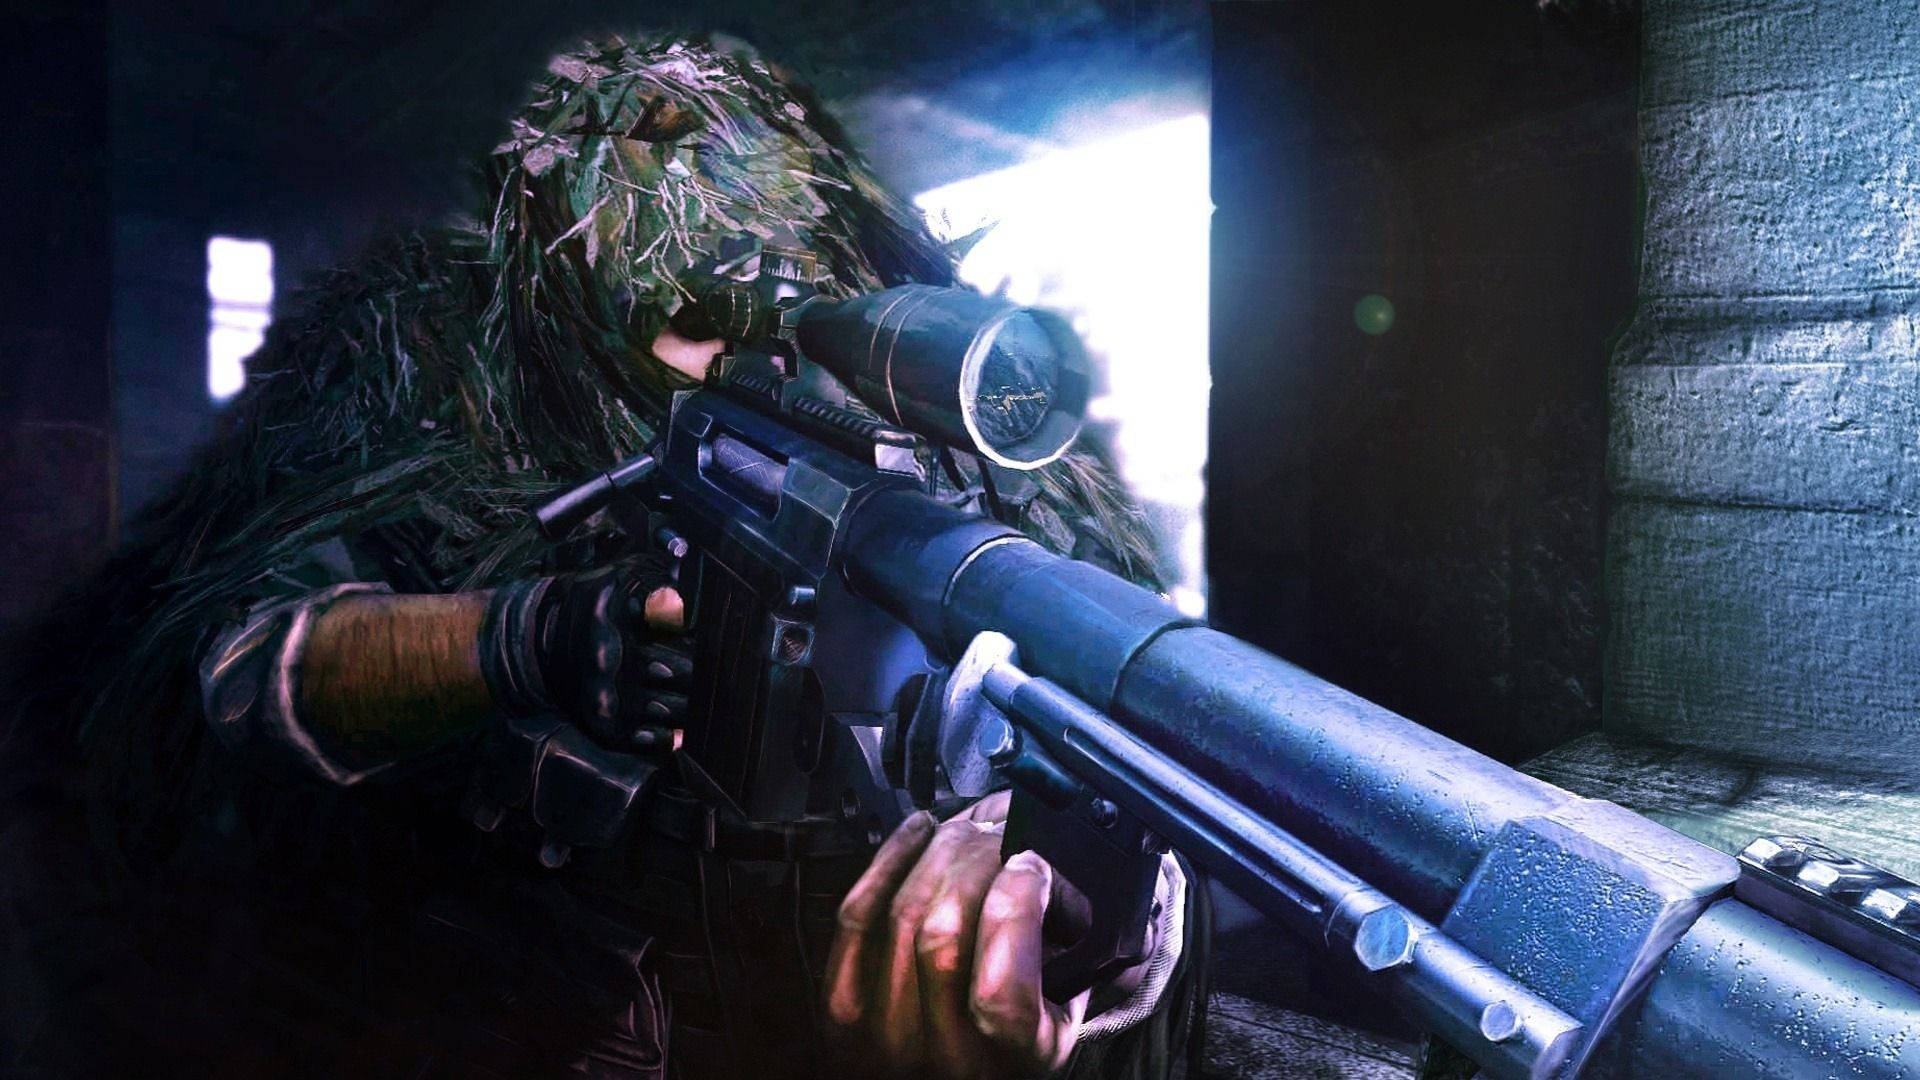 Shooting Sniper Army Soldier Background